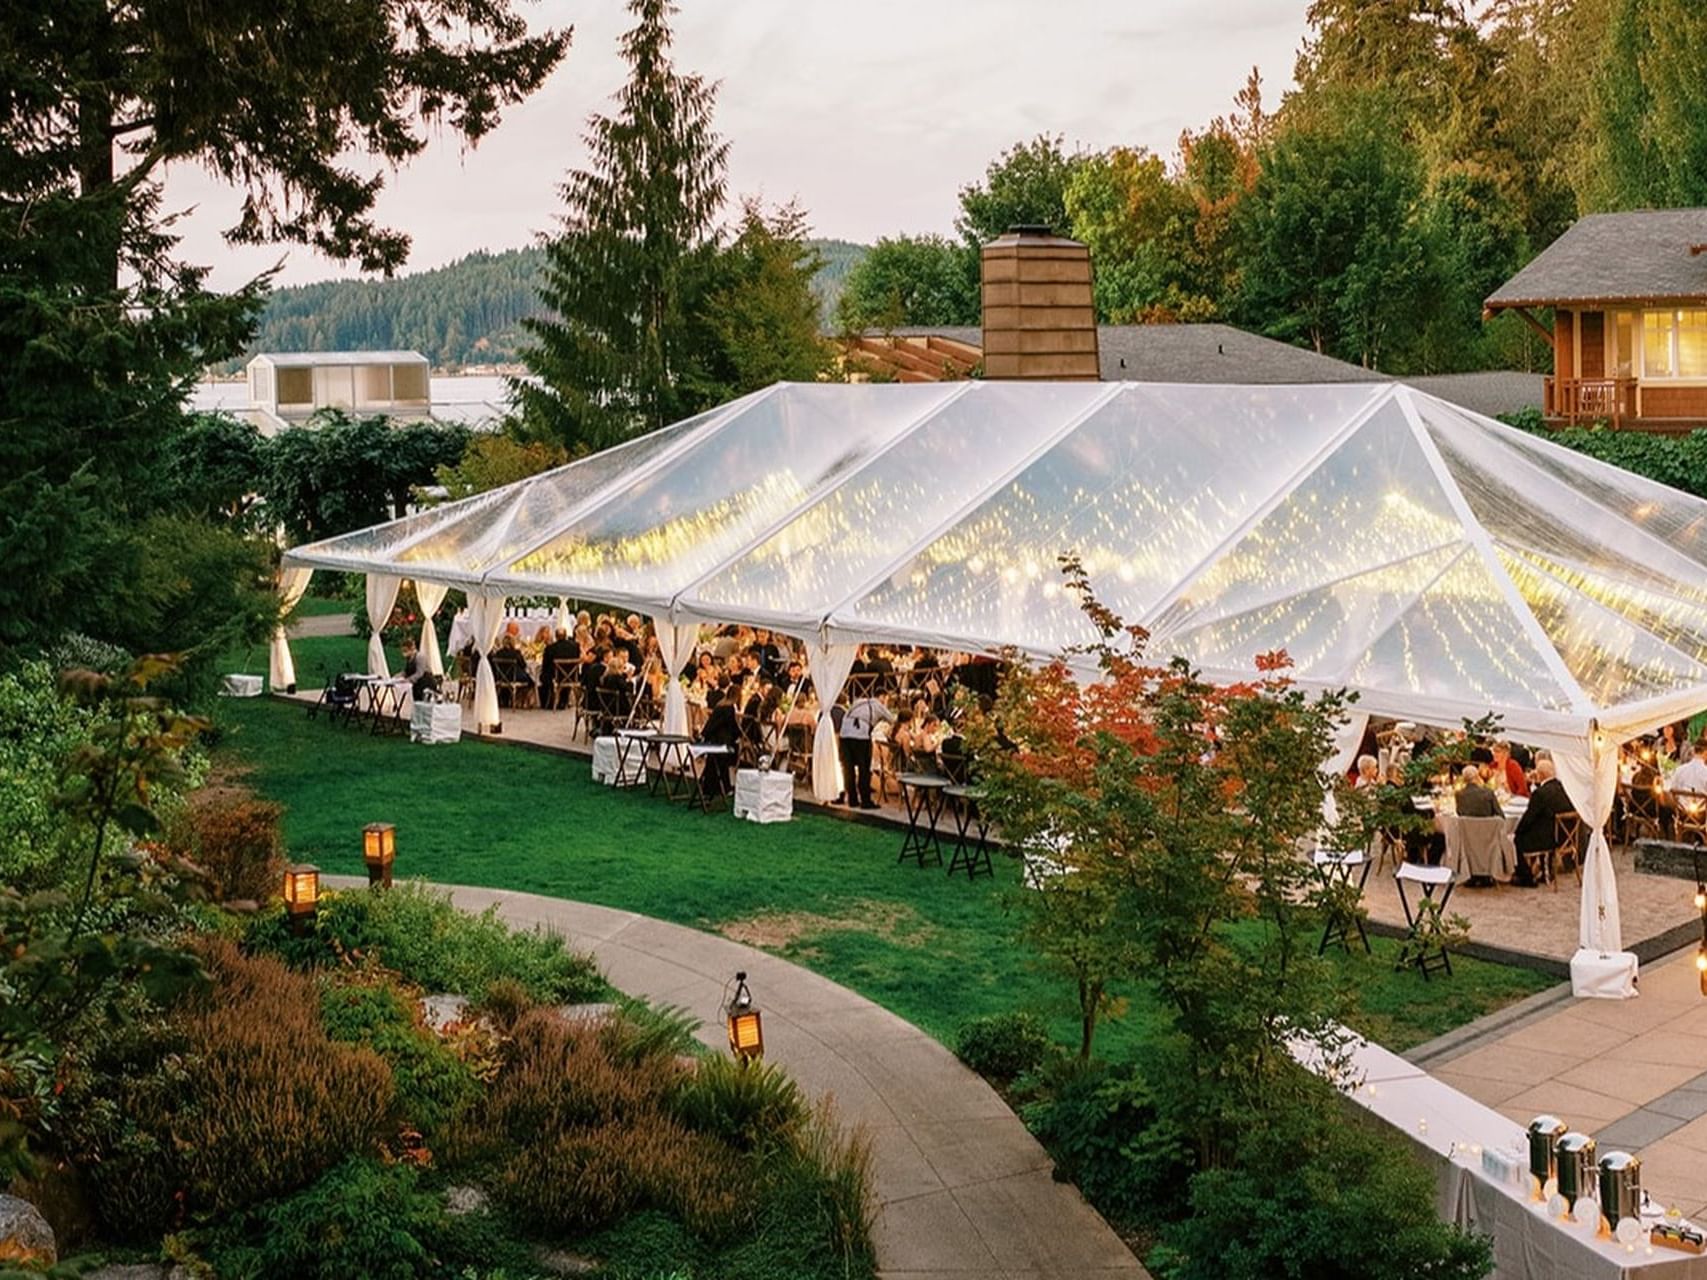 Illuminated tent in the Courtyard Lawn arranged for an event at Alderbrook Resort & Spa